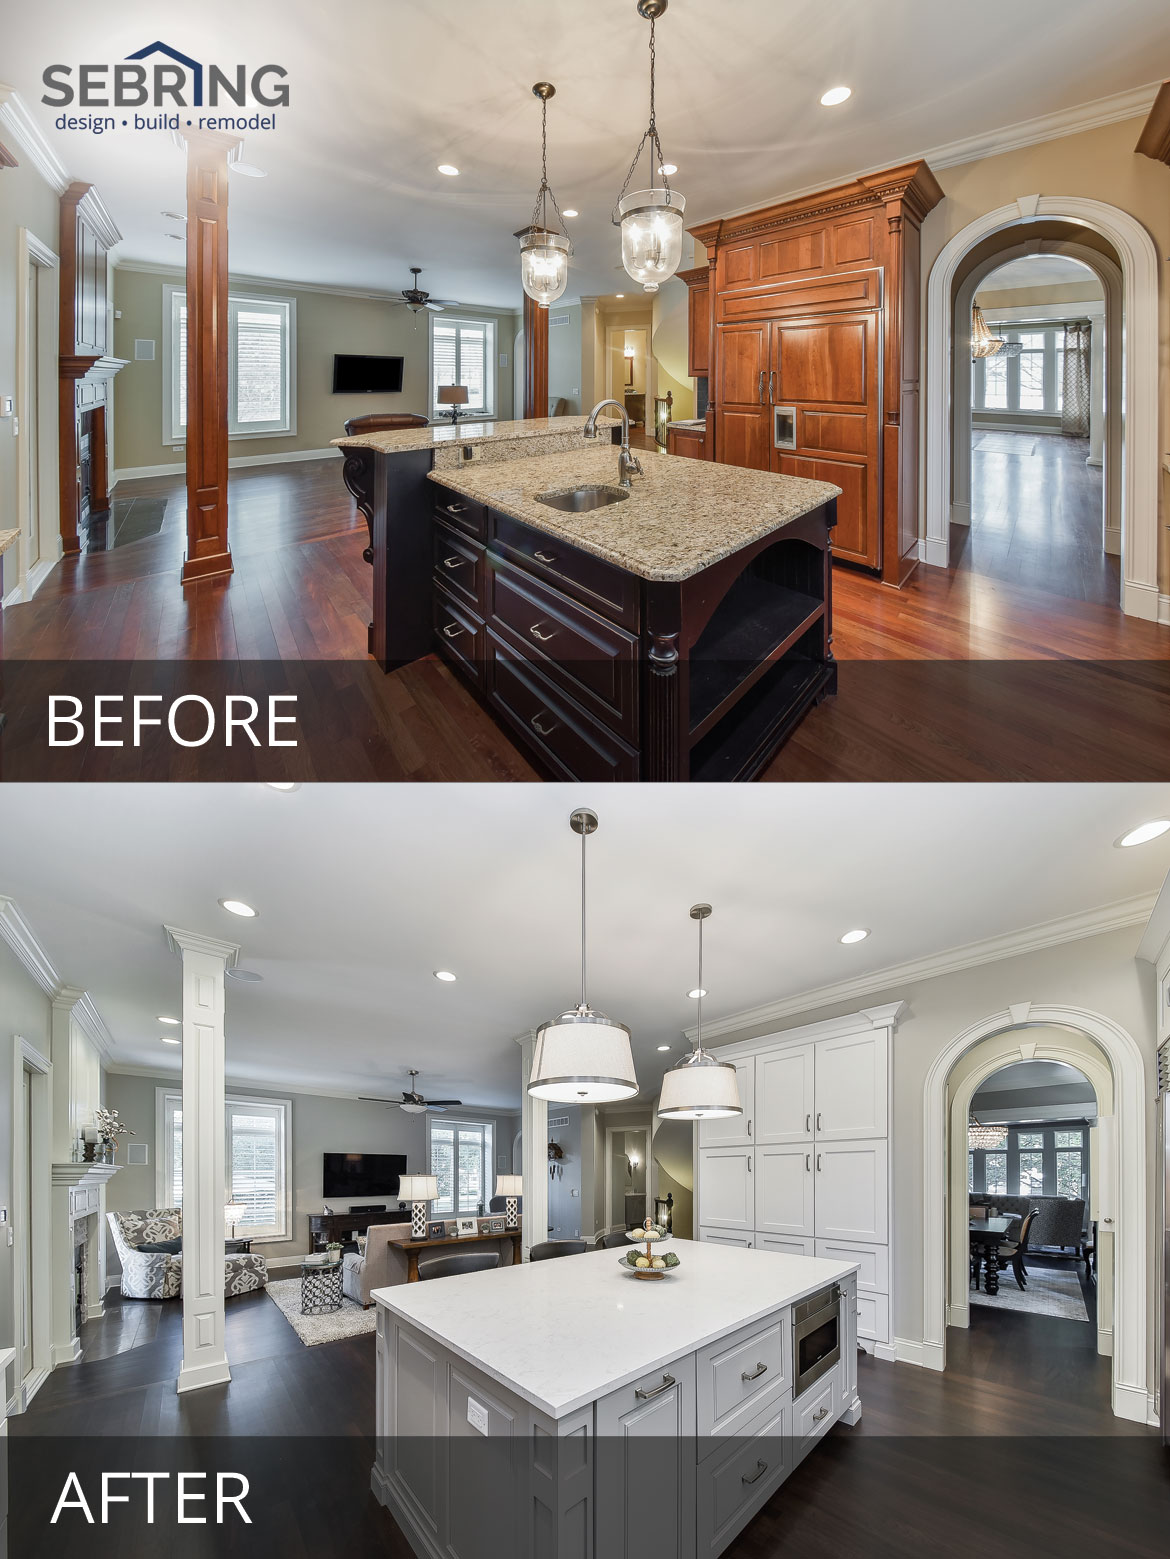 Rob & Michelle's Whole House Before & After Pictures | Home Remodeling Contractors | Sebring Design Build